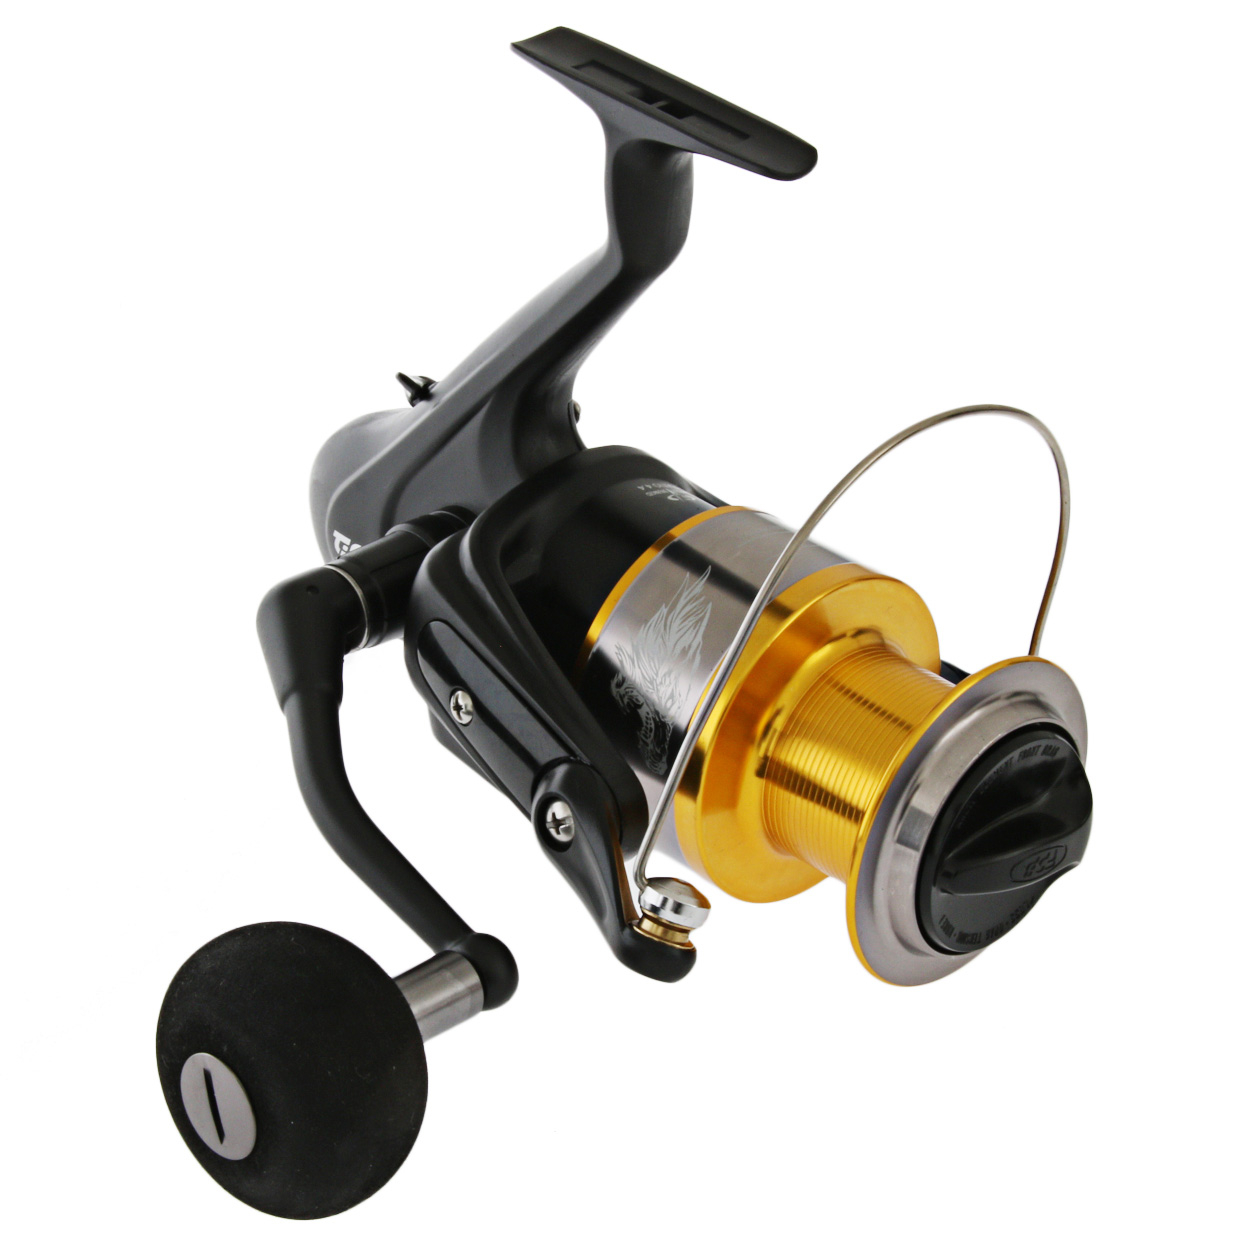 Buy TiCA Brute Wolf BW8000 Surfcasting Reel online at